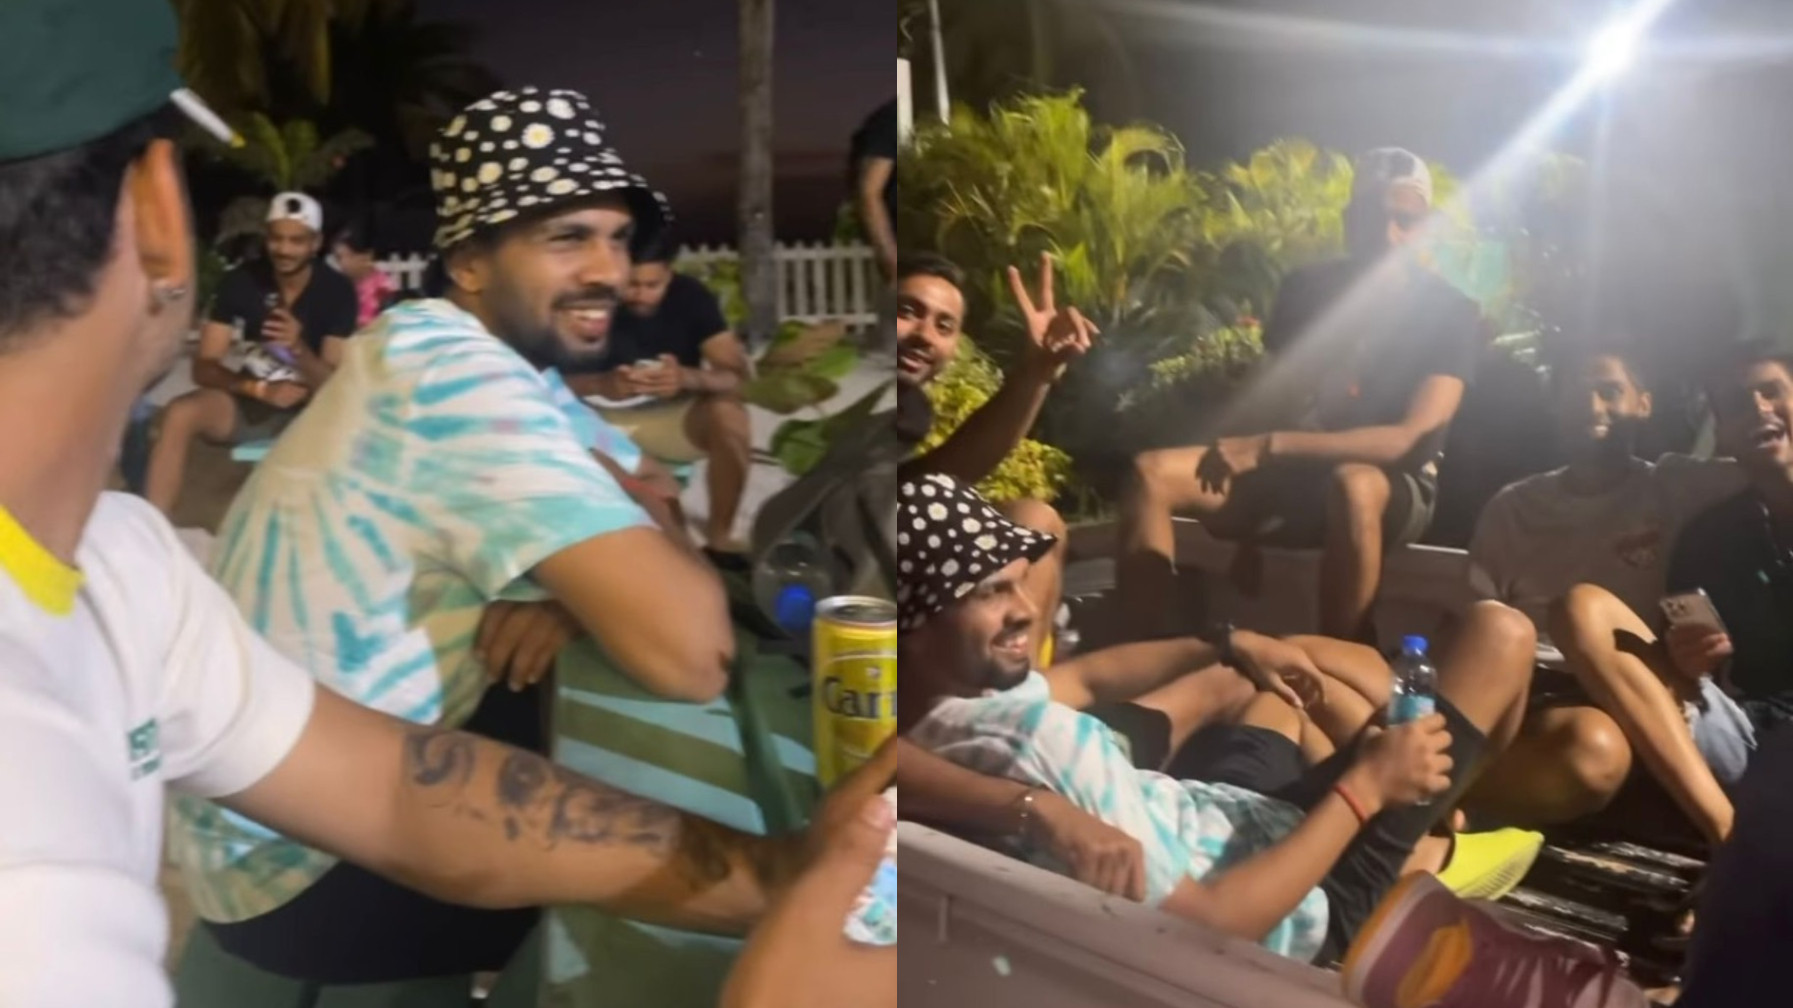 WI v IND 2022: See Pics- Indian team members enjoying some time off in Trinidad